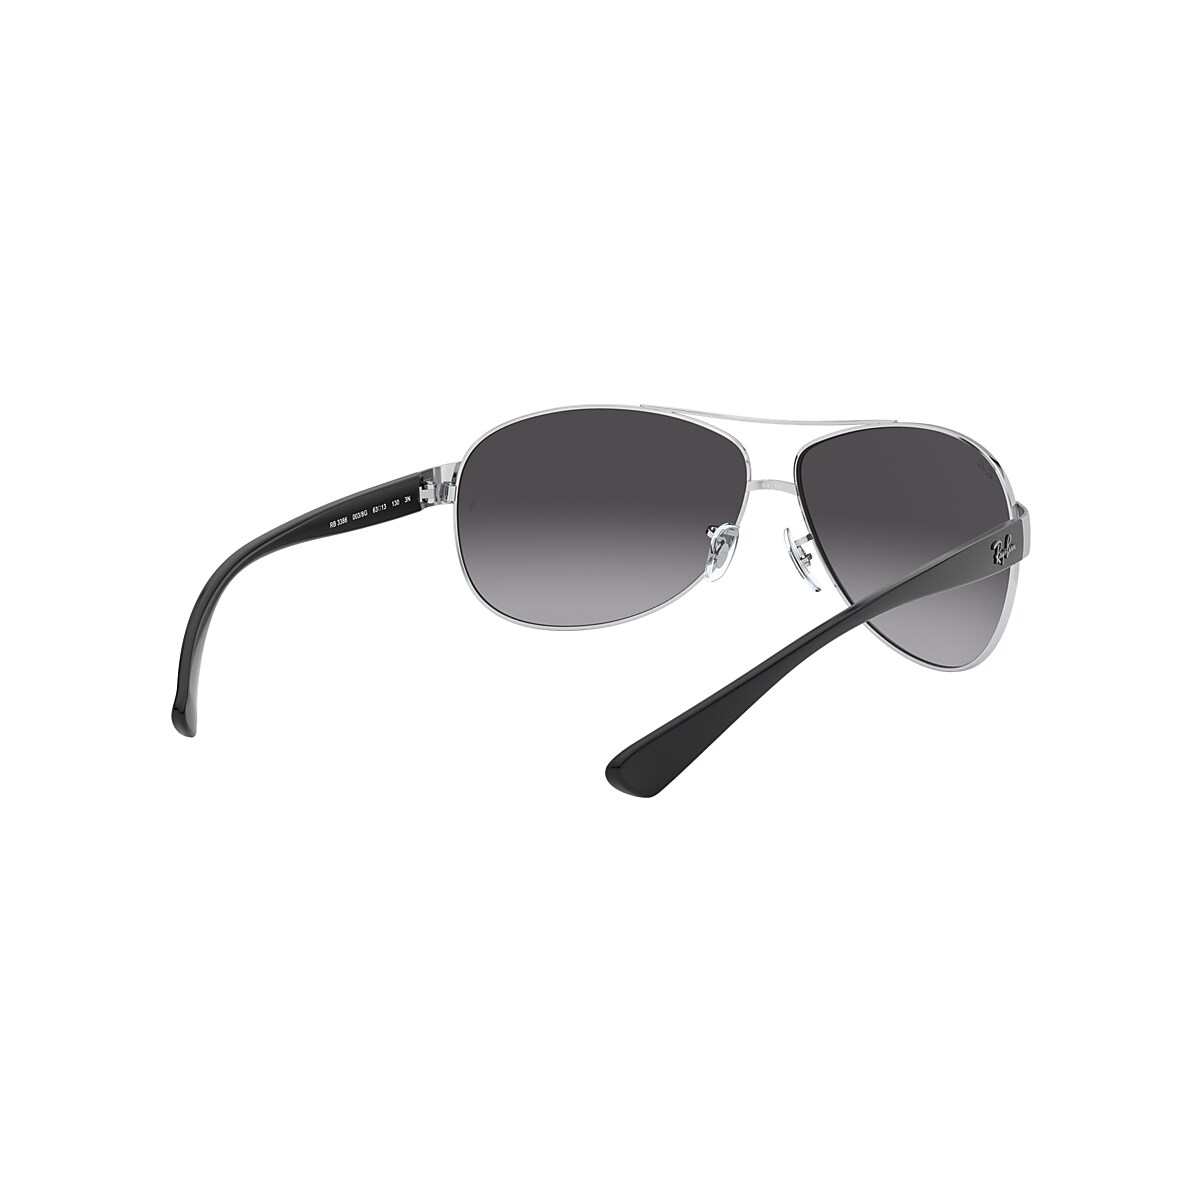 RB3386 Sunglasses in Silver and Grey - RB3386 | Ray-Ban® US